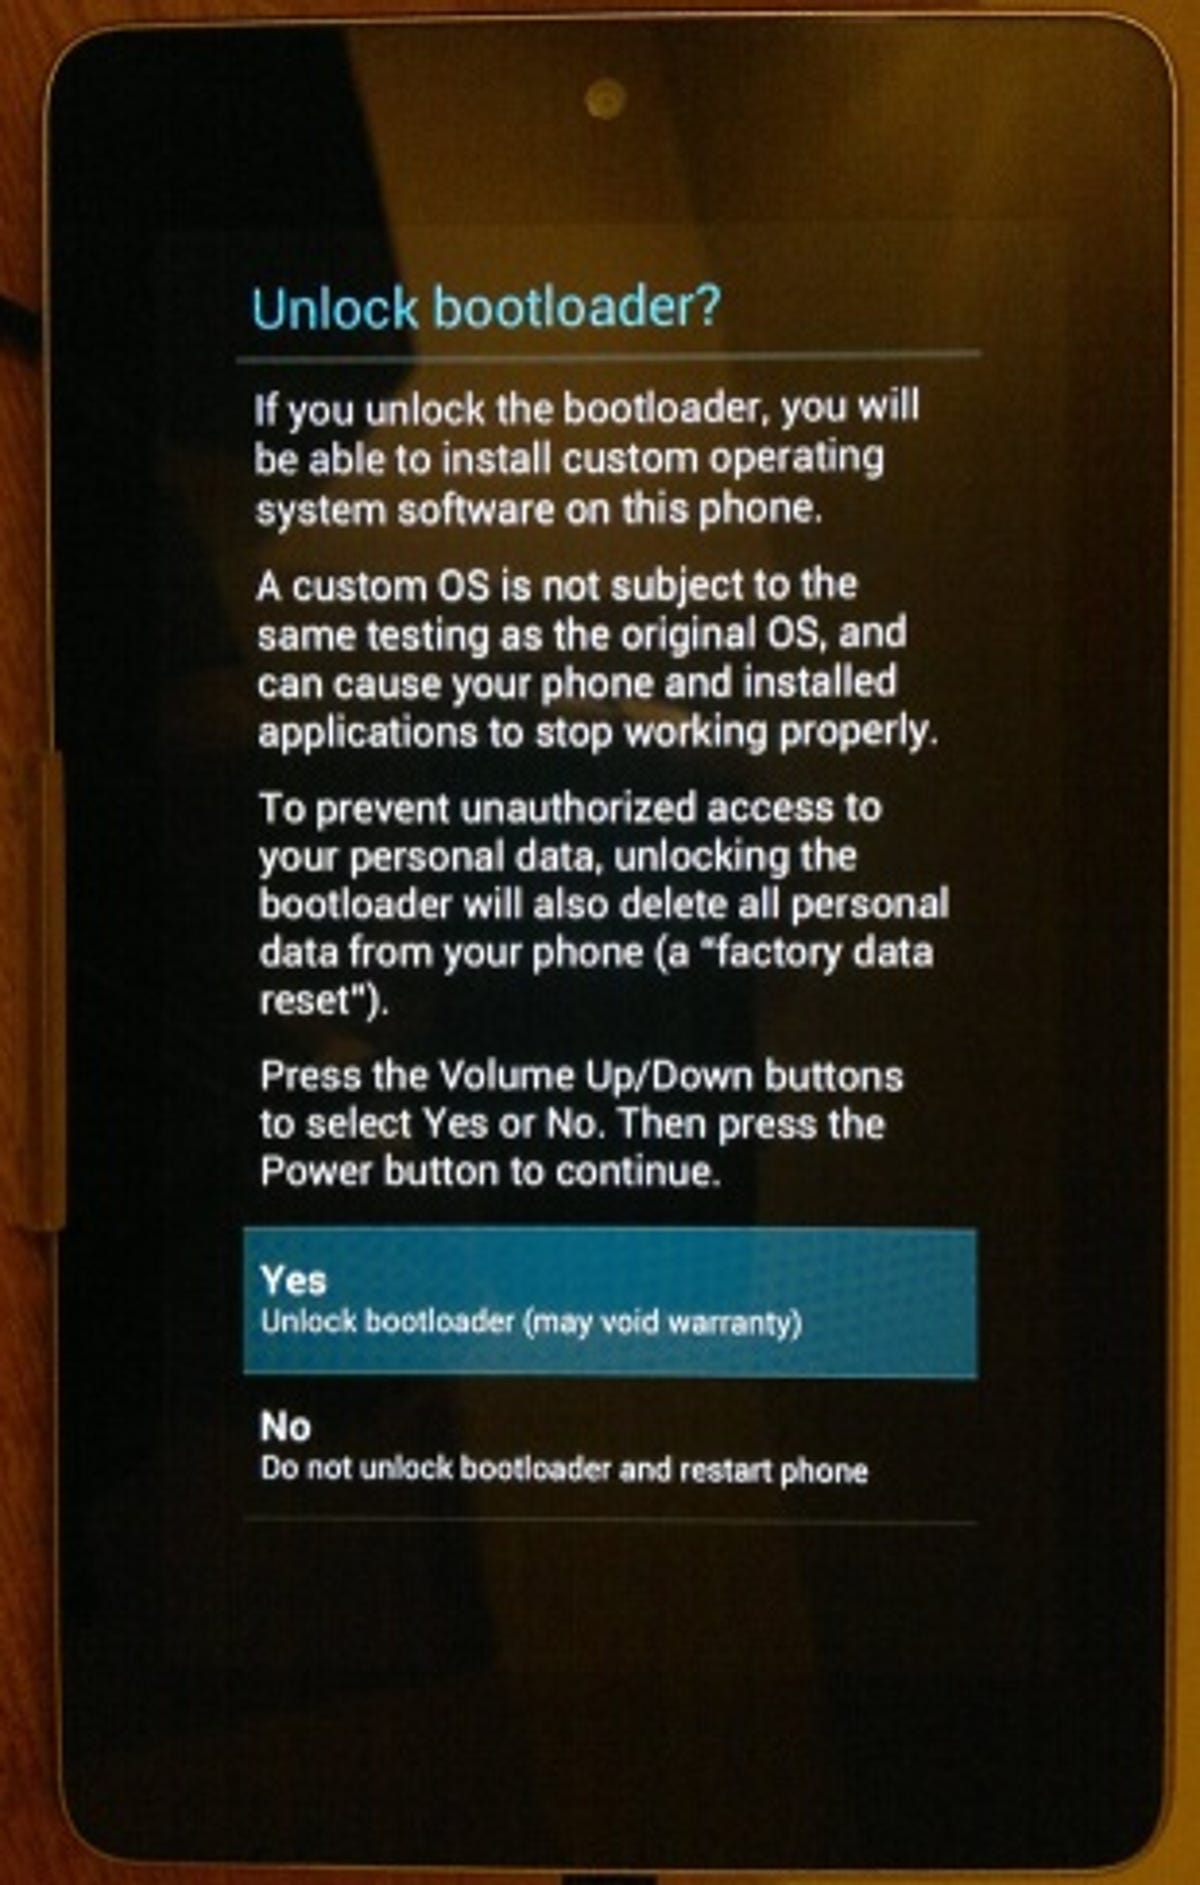 The Android boot loader unlock screen